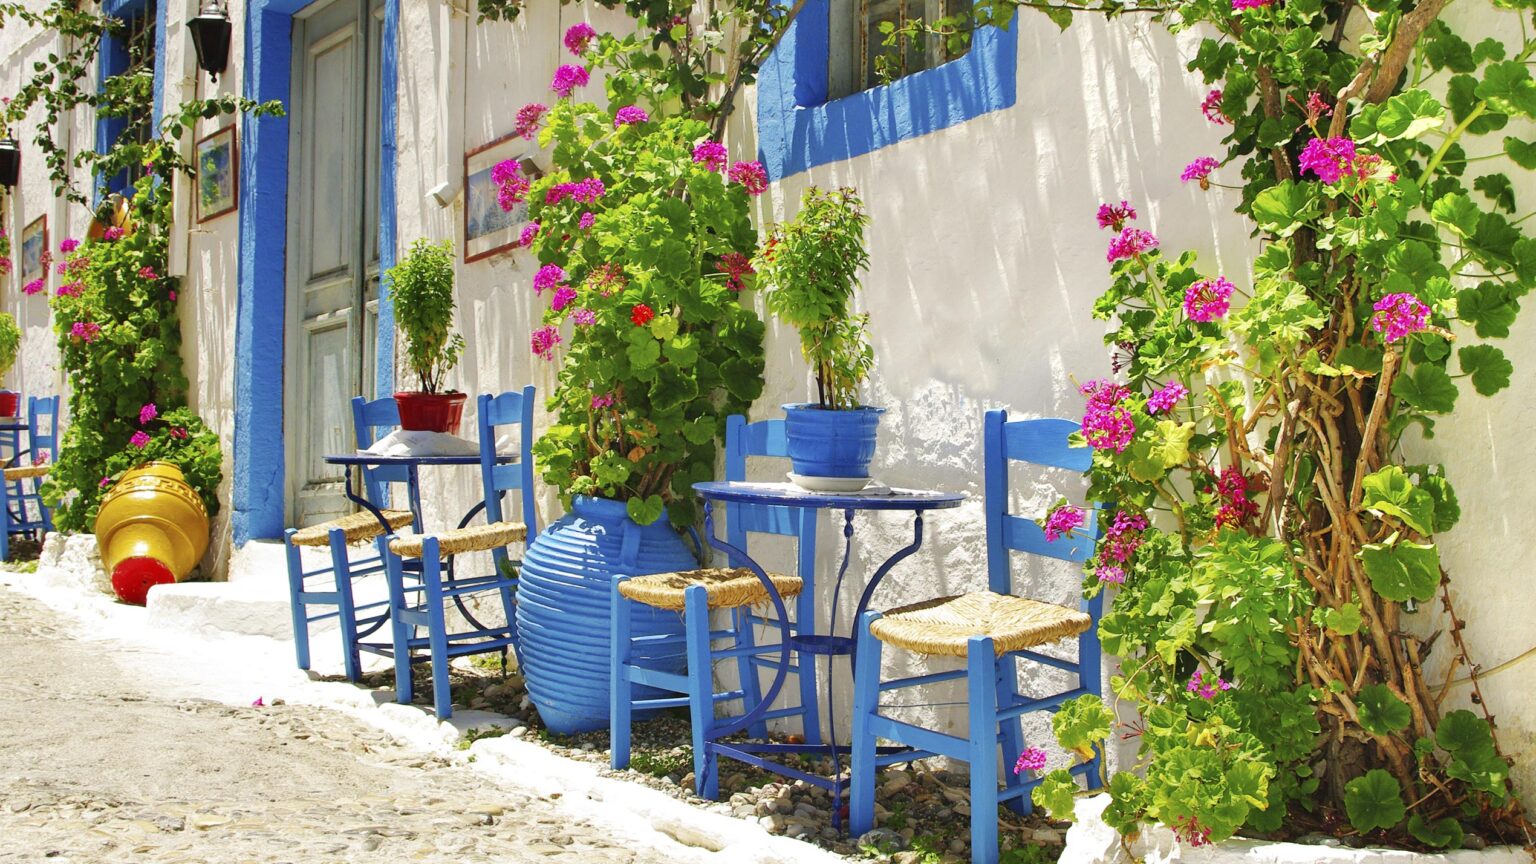 Whitewash walls, vegetation and contrasting blue accent colour on chair, tables, door frames and window frames - Mediterranean garden featrures